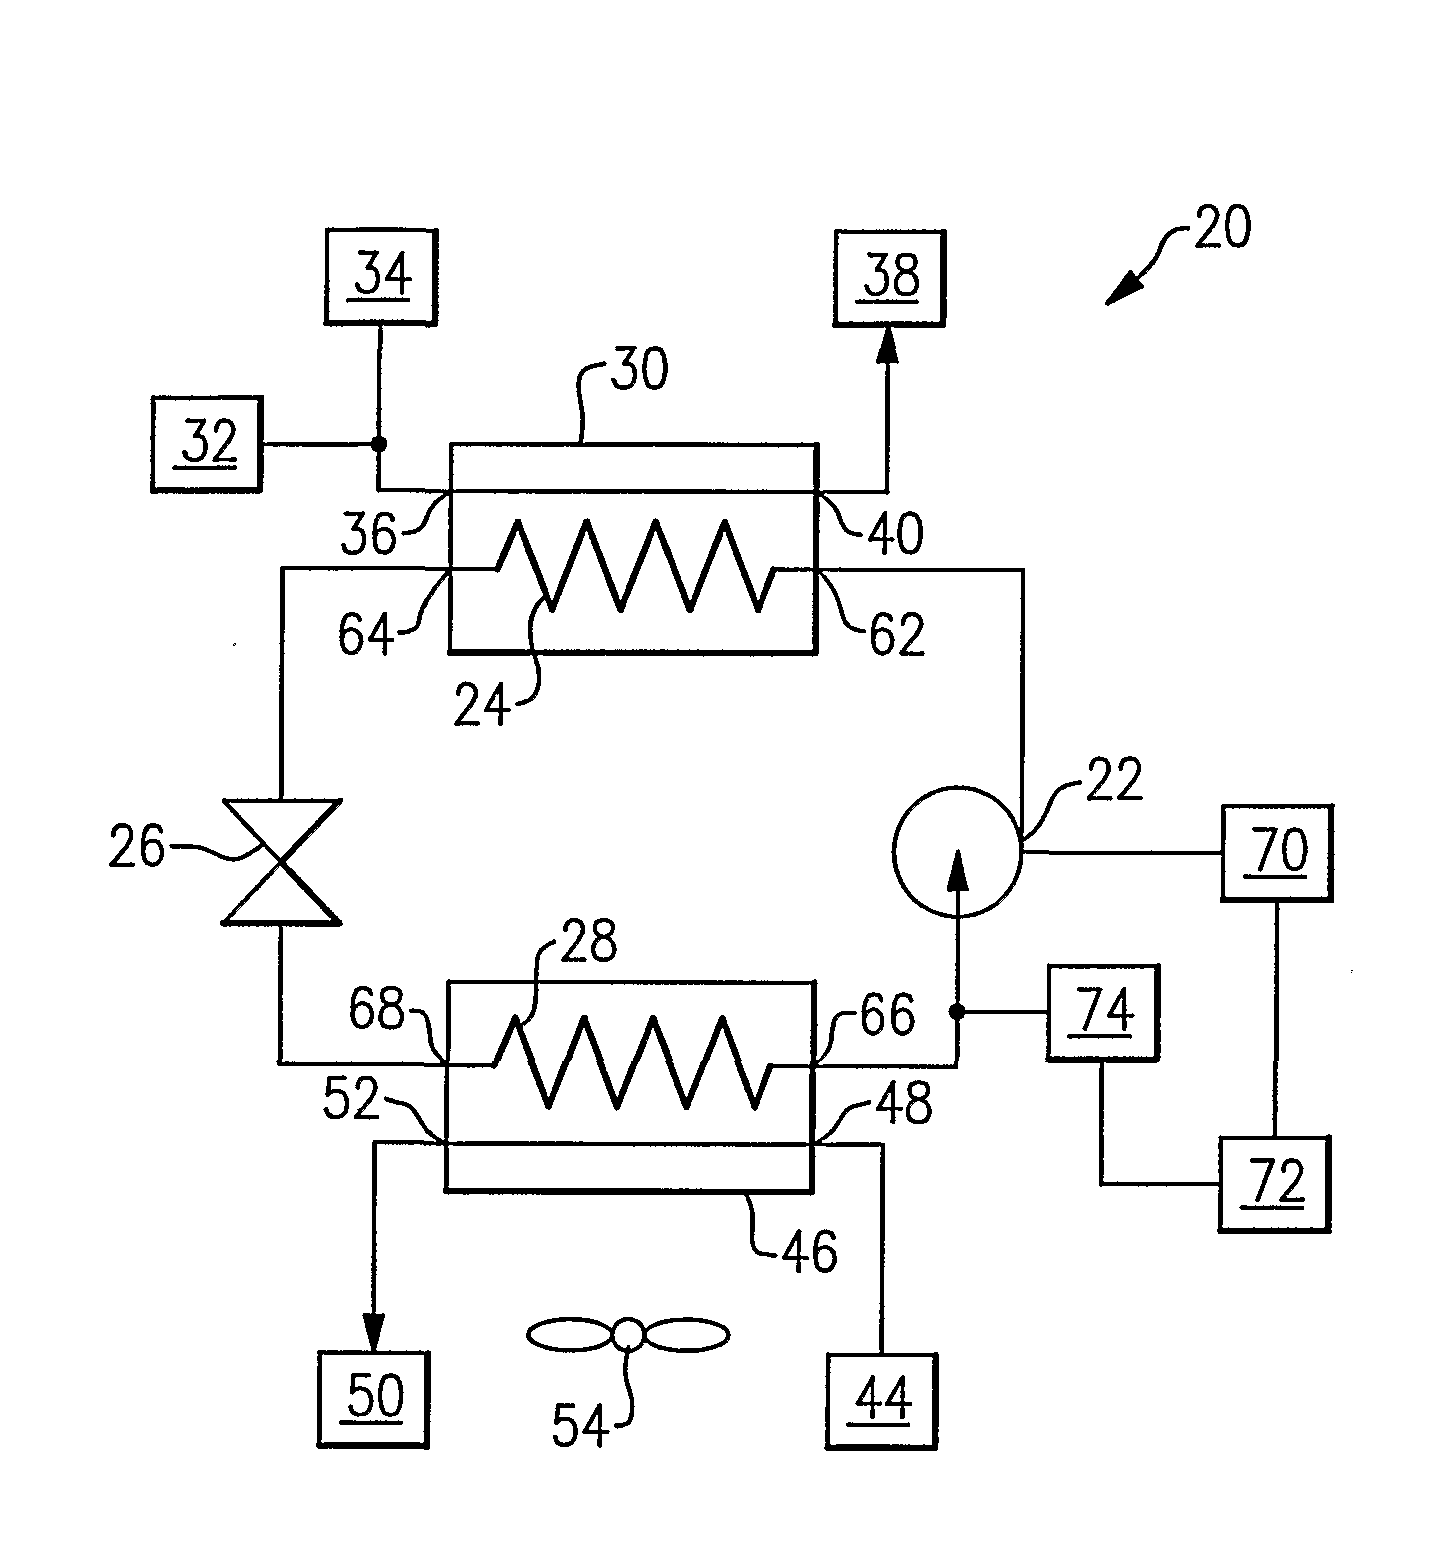 Heat Pump Water Heating System Using Variable Speed Compressor